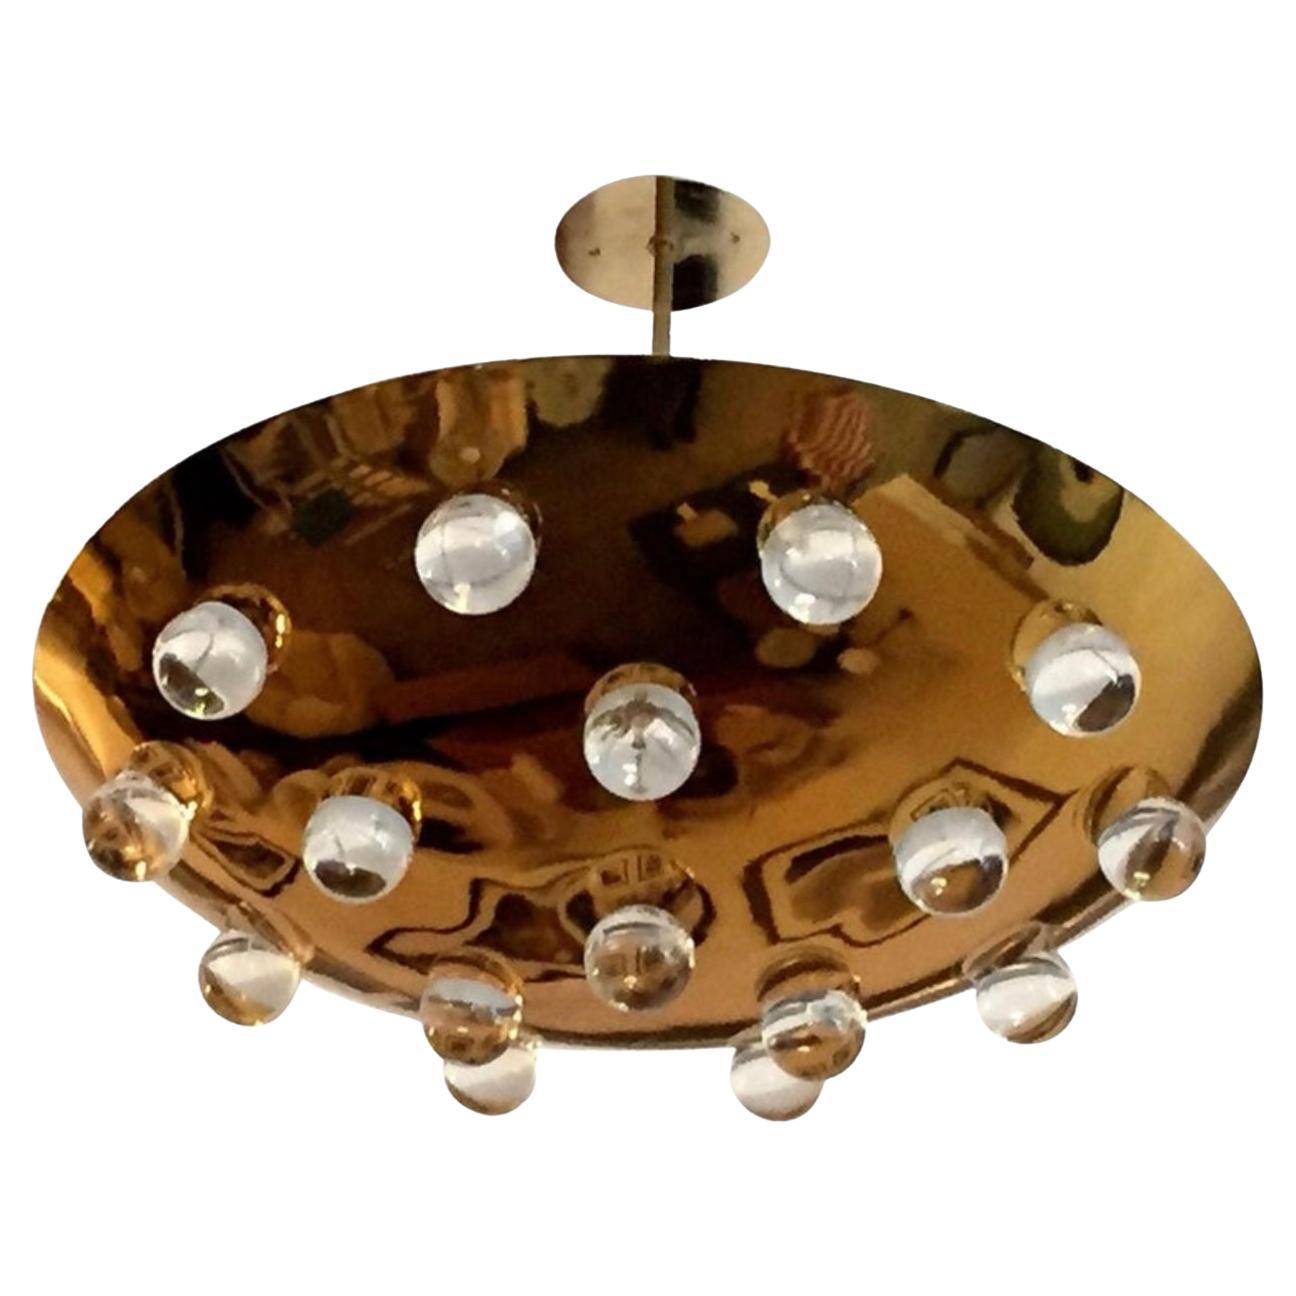 What’s the difference between a pendant and chandelier?